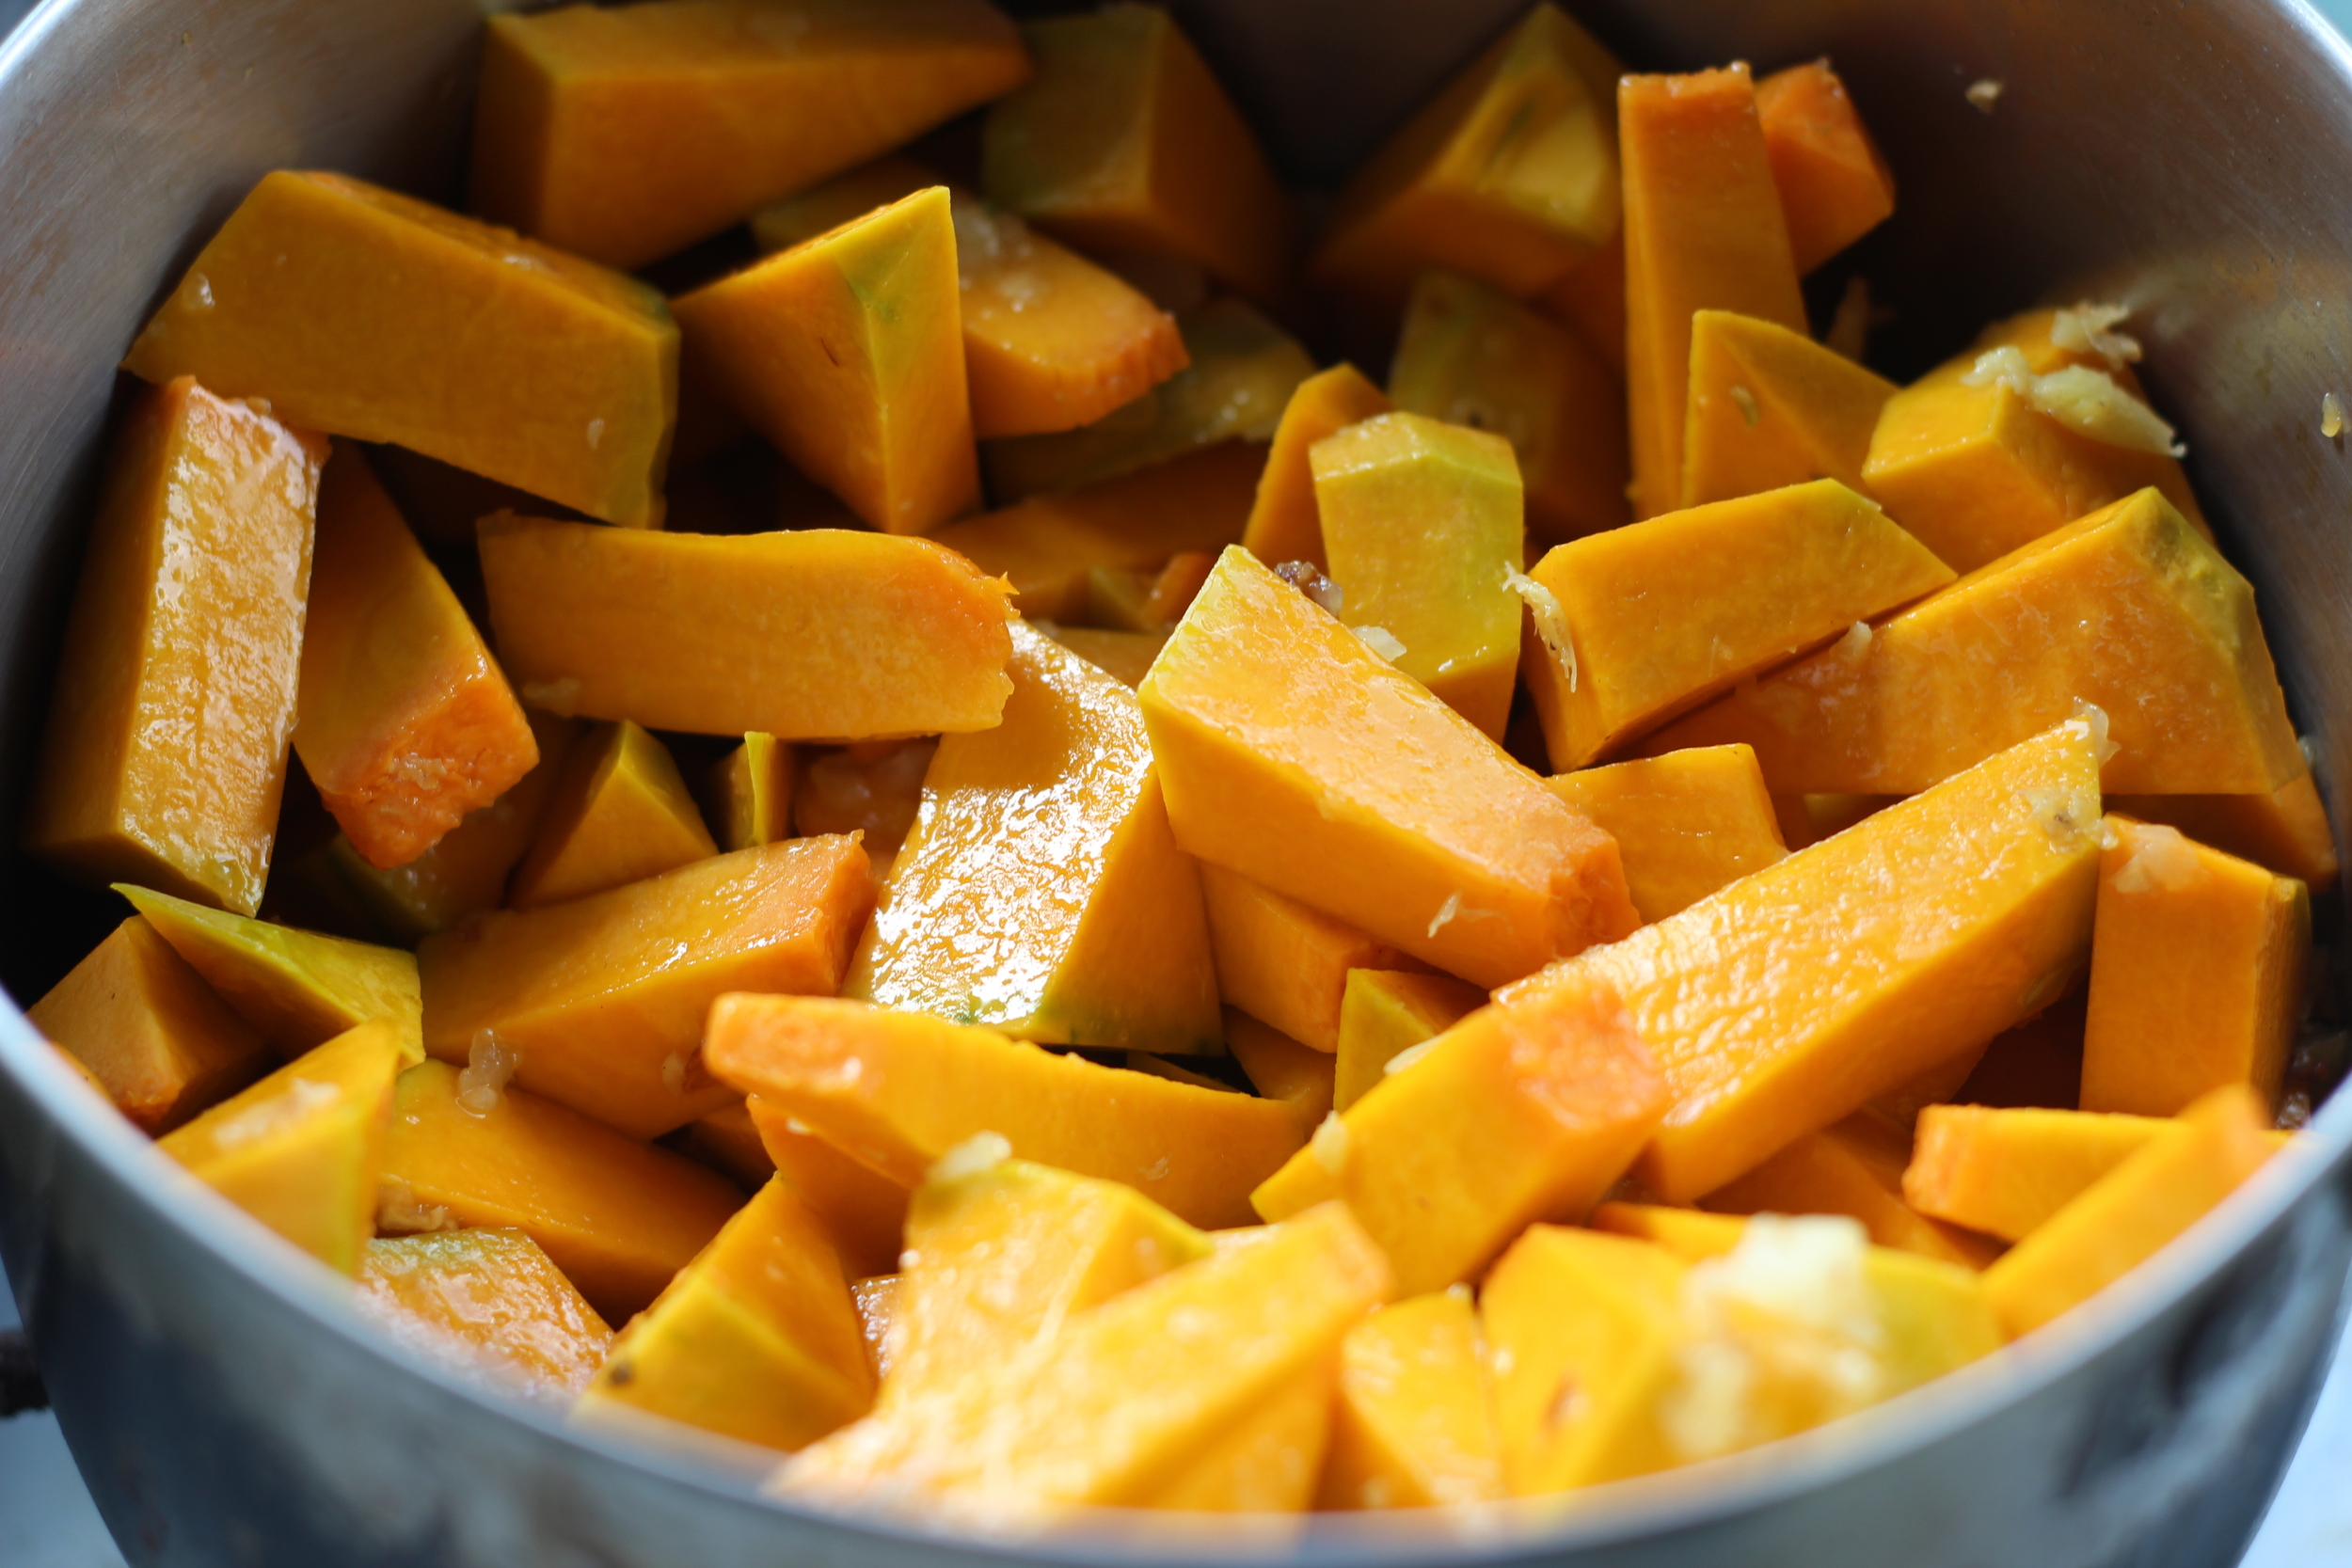  once fragrant, stir with squash to coat 